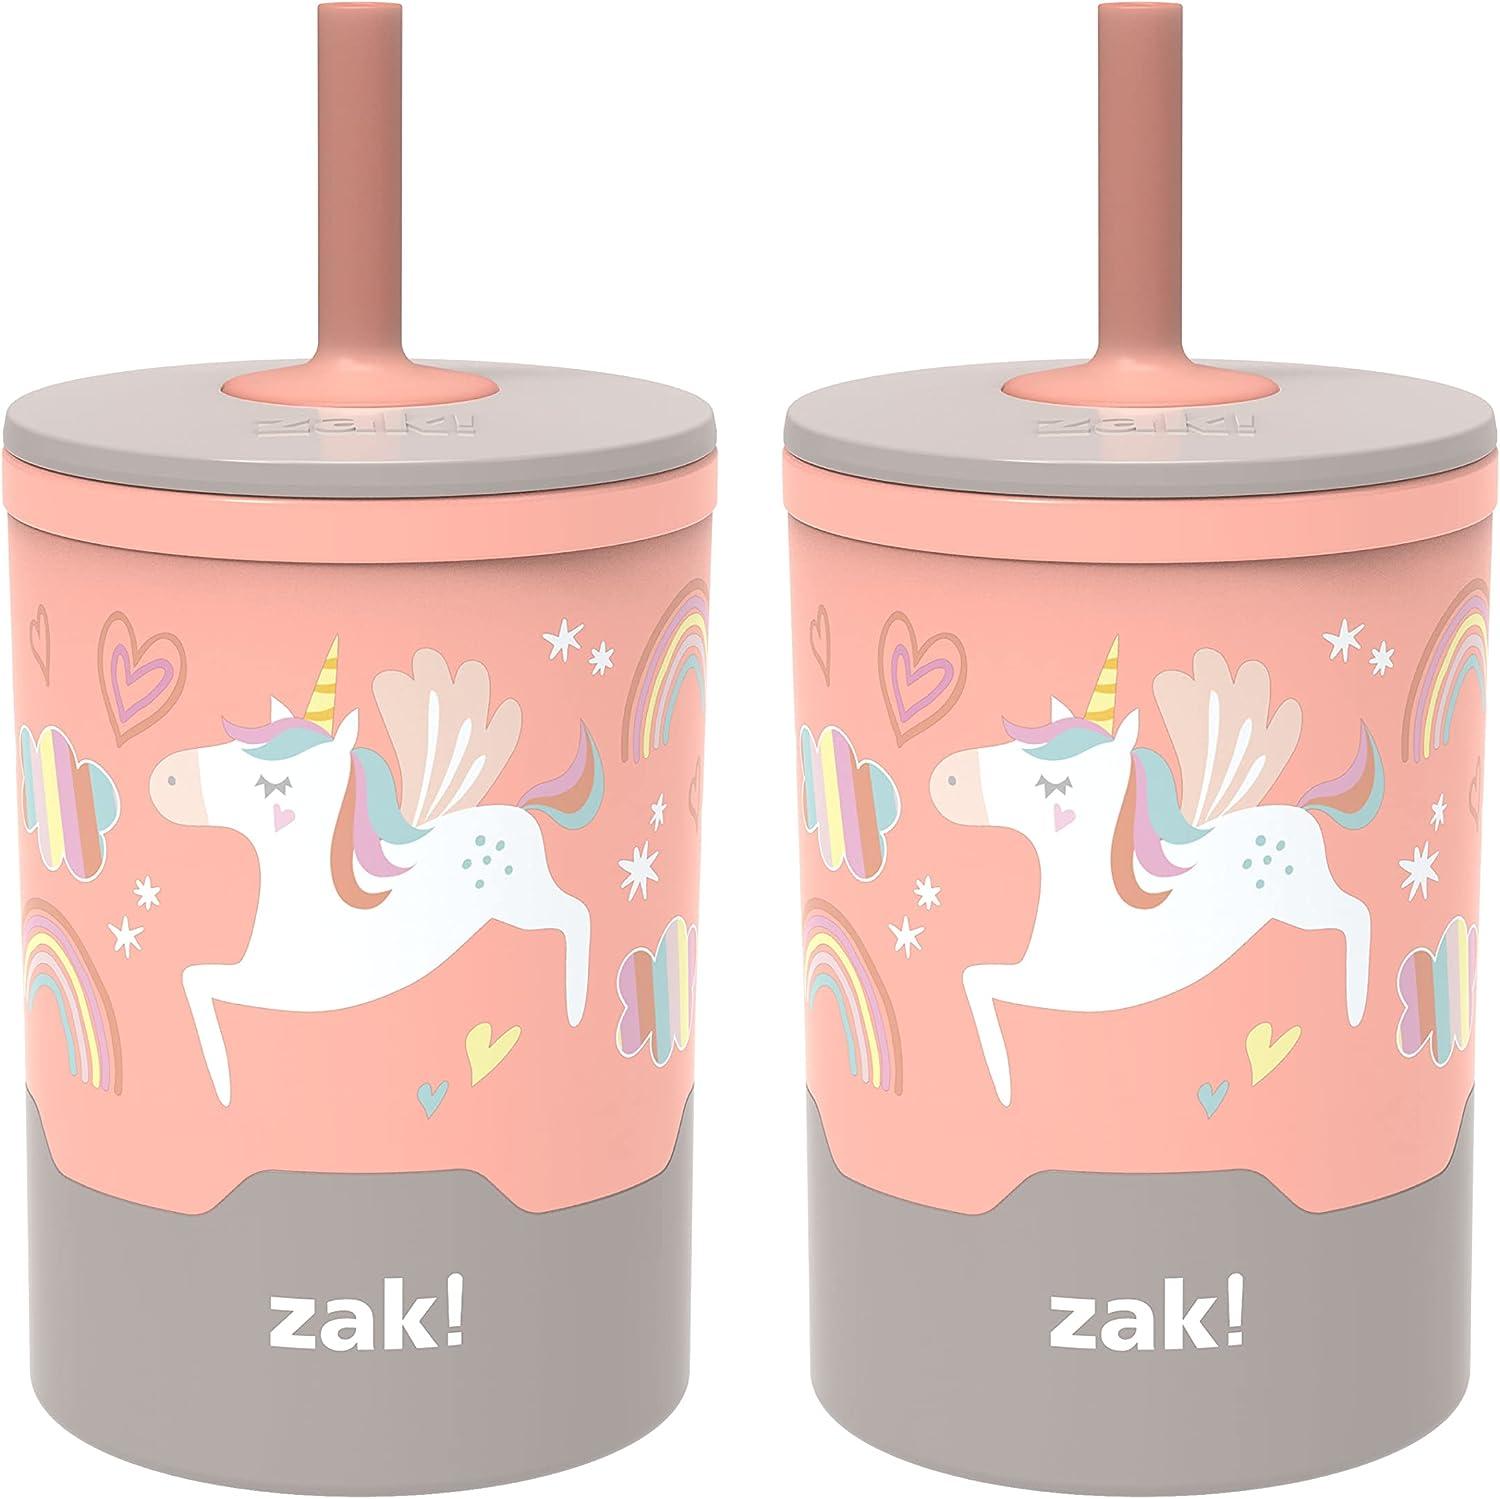 Exciting ✨ New Kids' Collection - Zak Designs